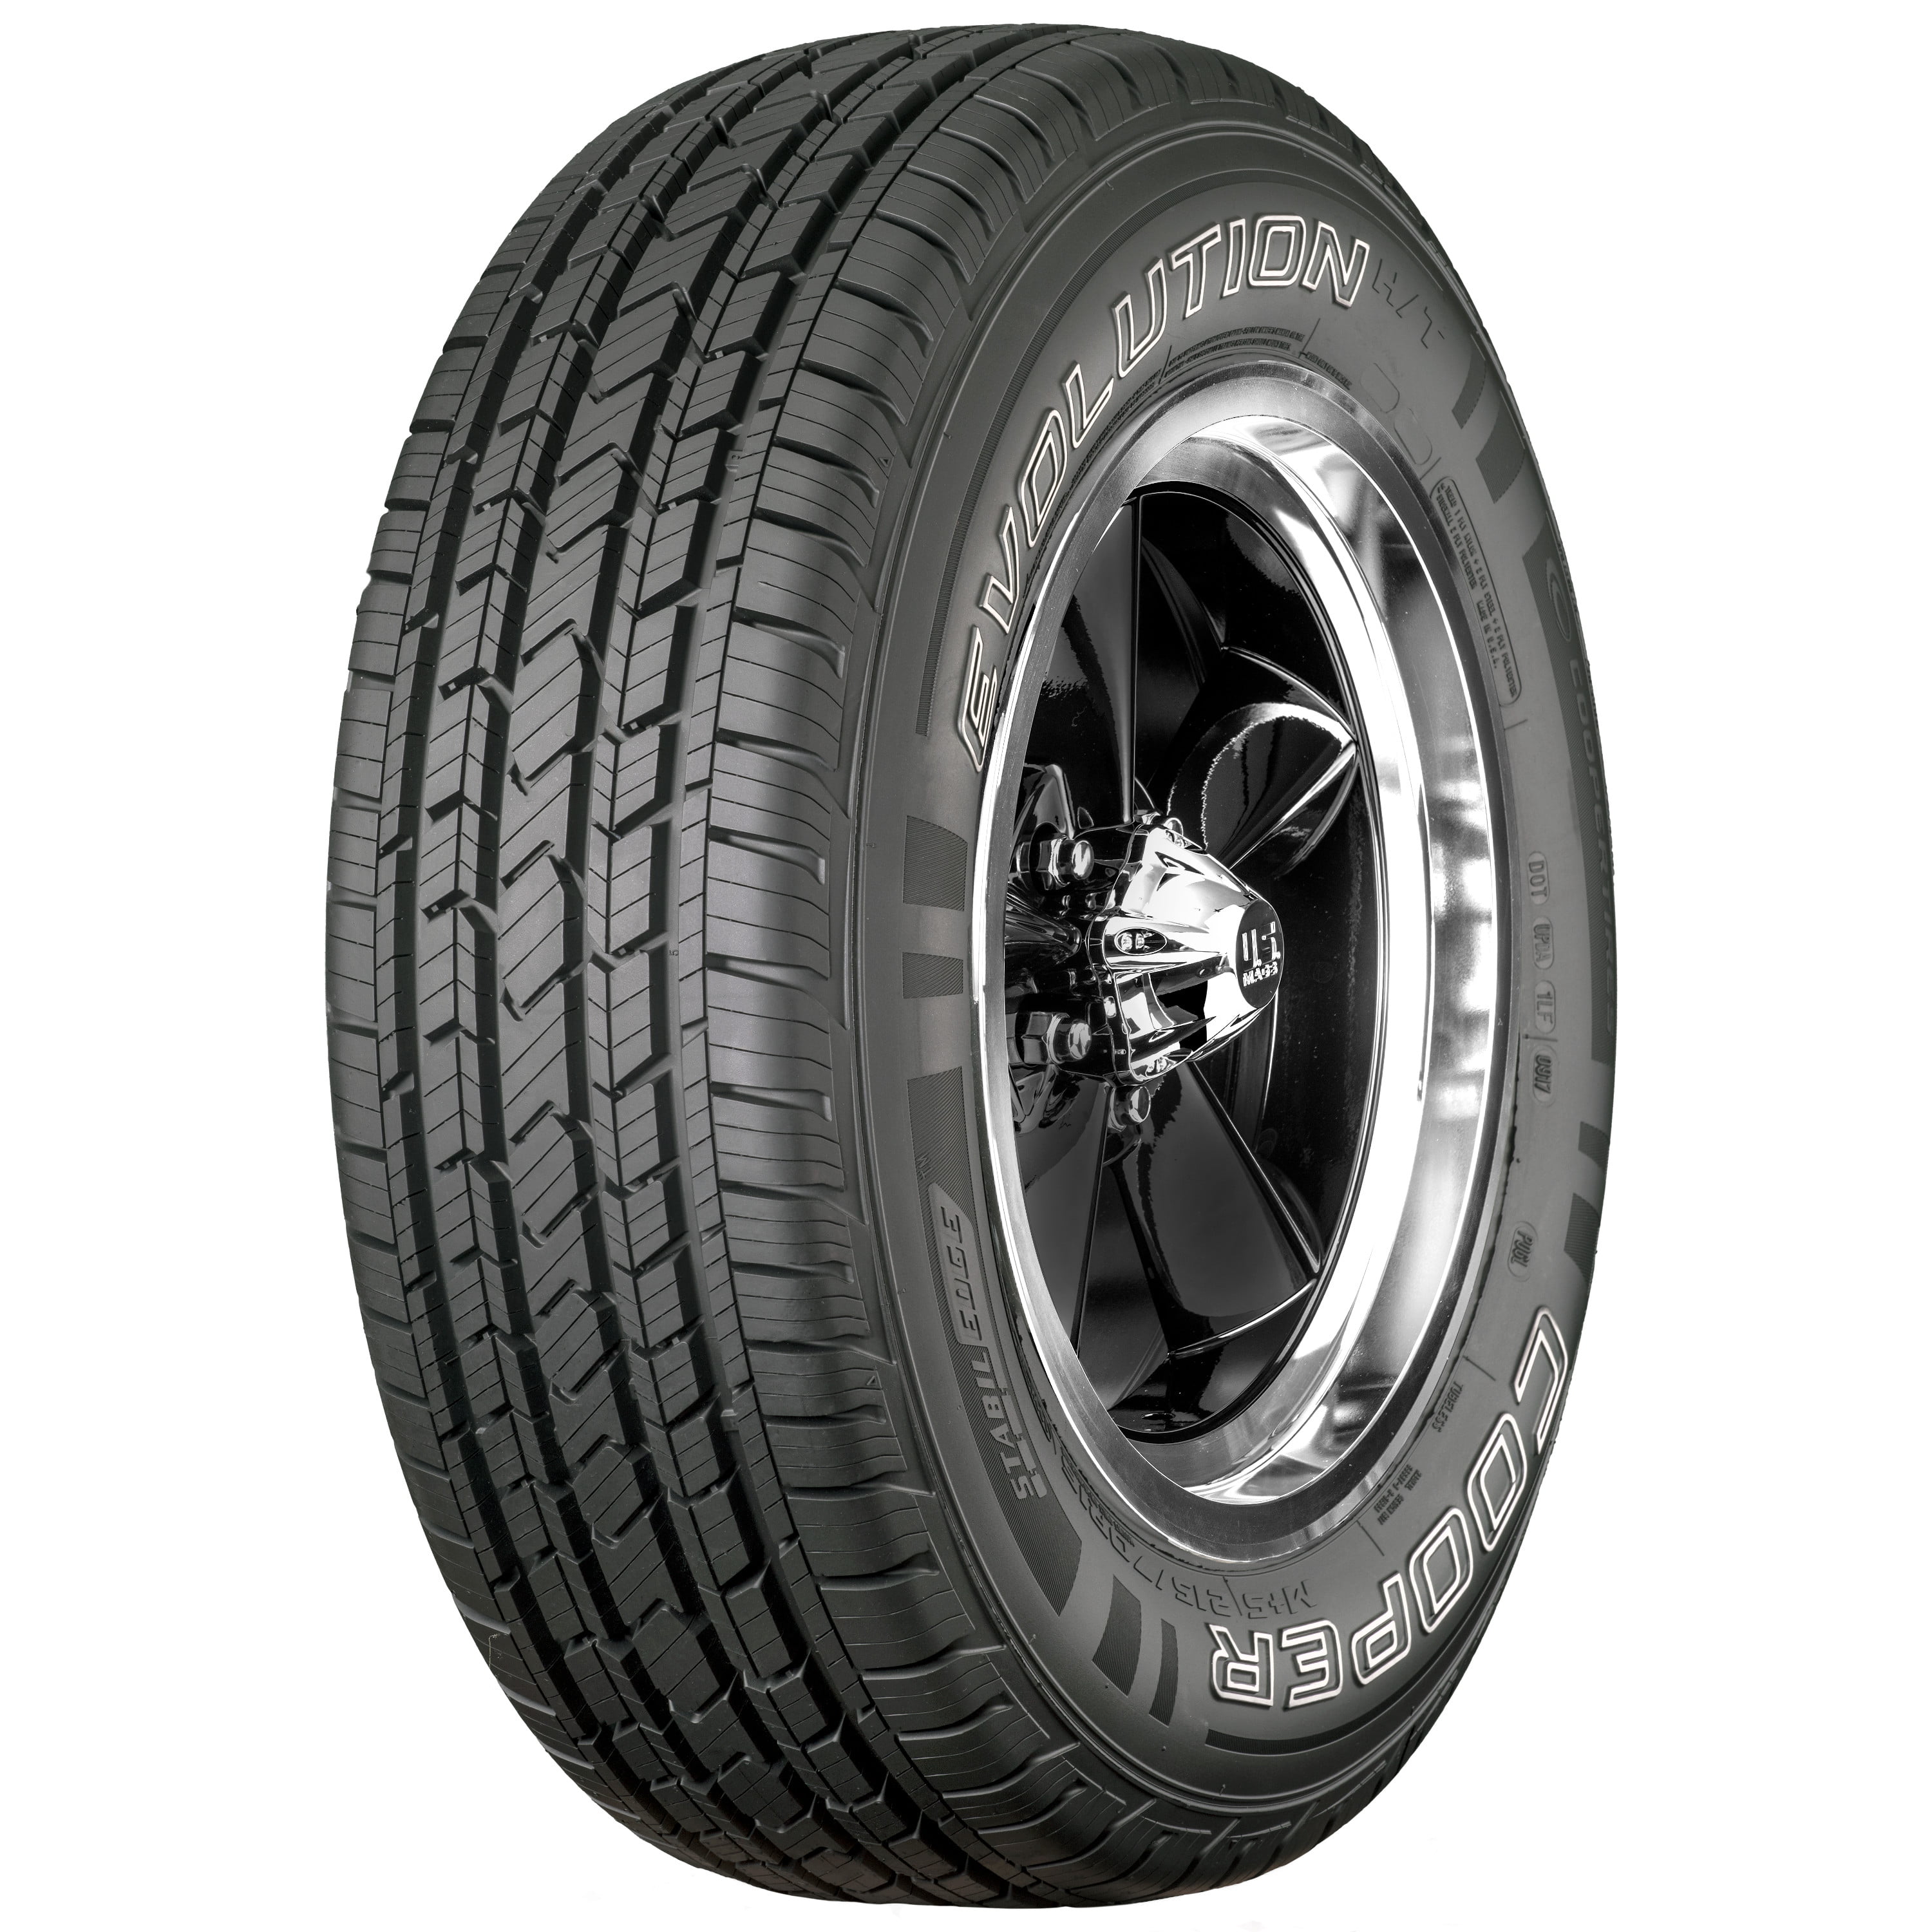 1 New 255//70-16 Cooper Discoverer M+S Winter Performance  Tire 2557016